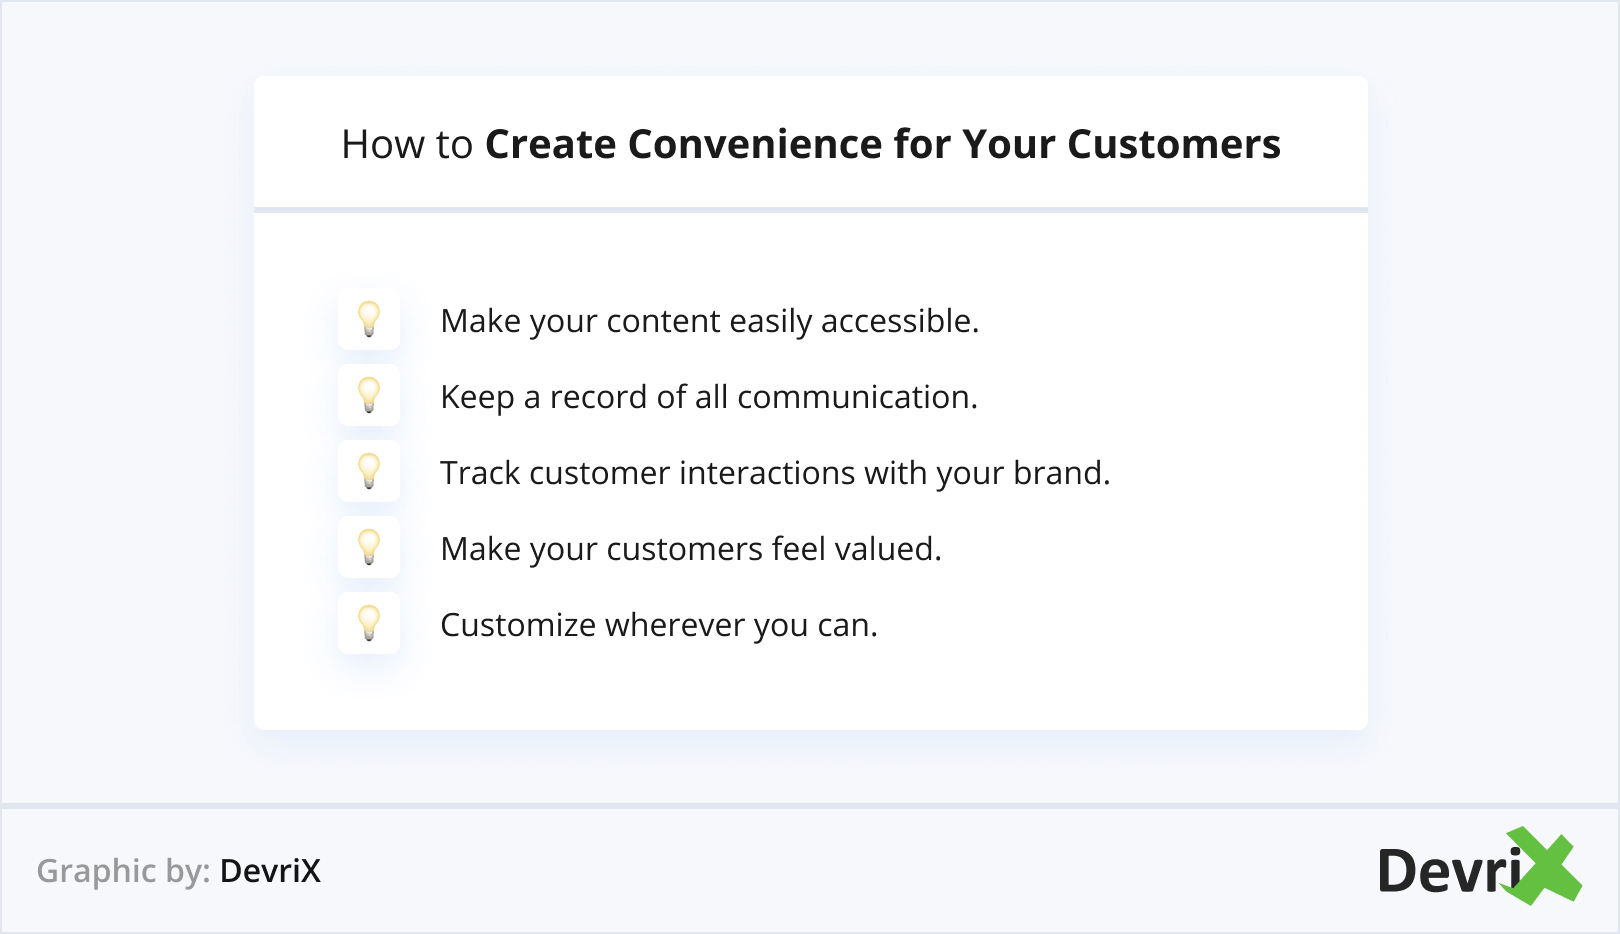 How to Create Convenience for Your Customers